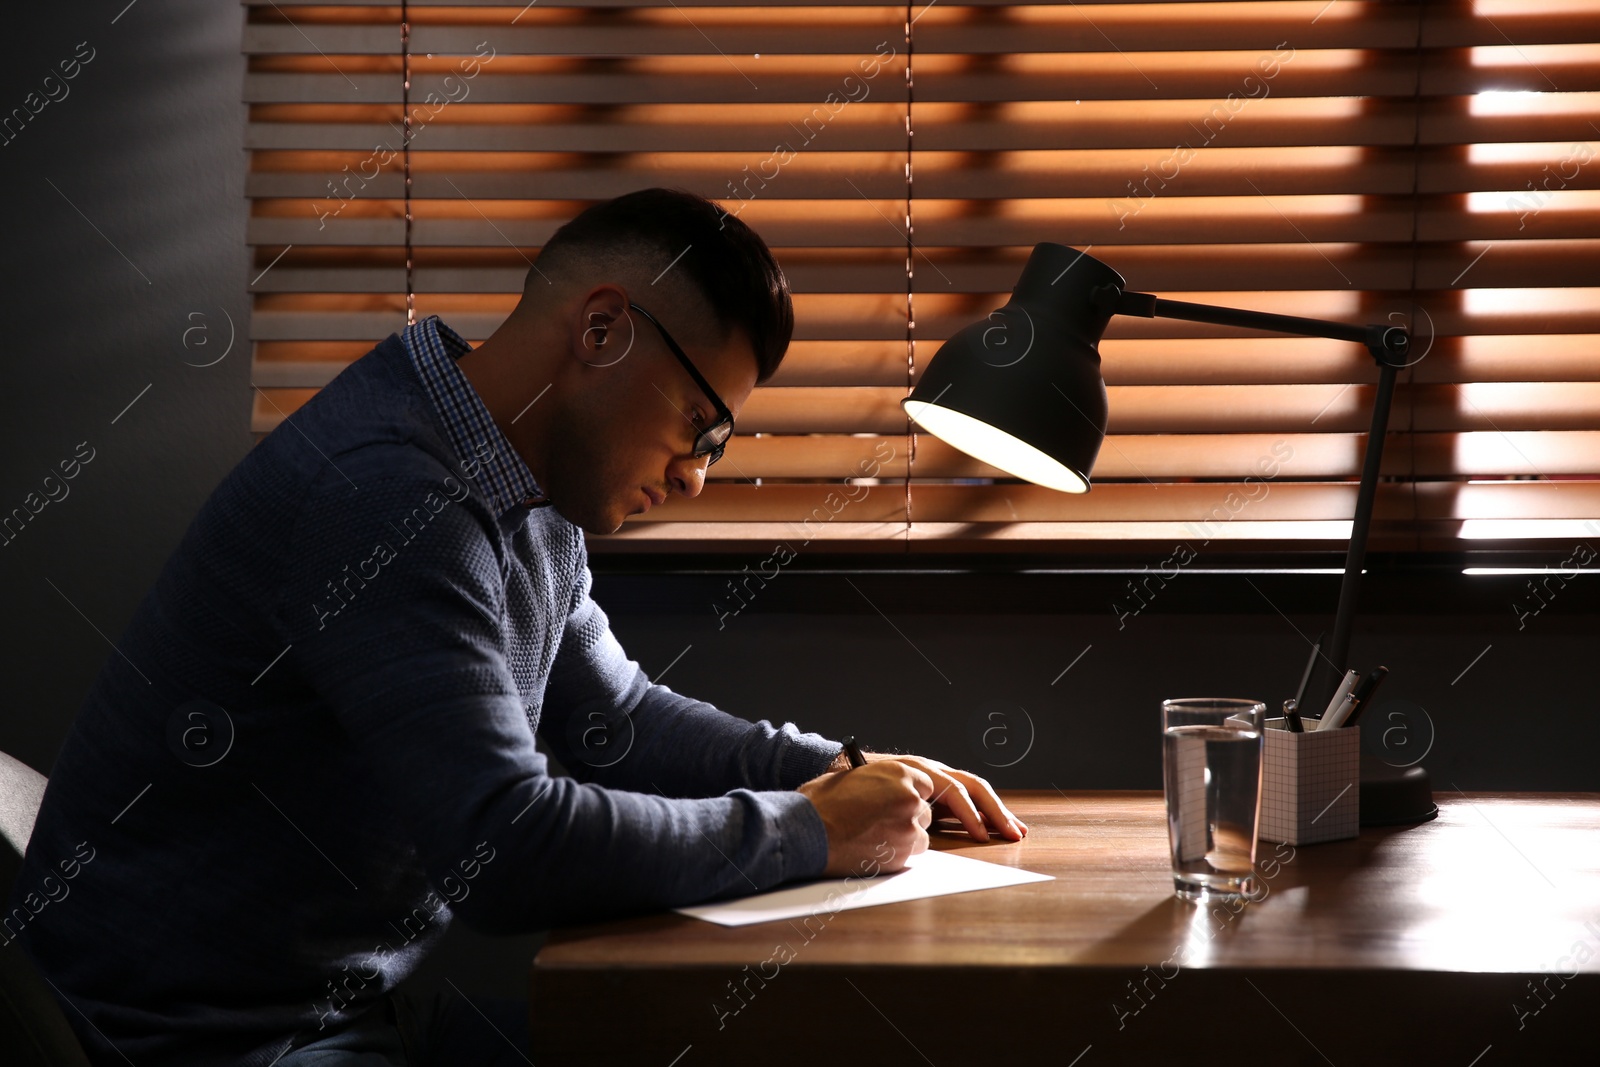 Photo of Man writing letter at wooden table in dark room